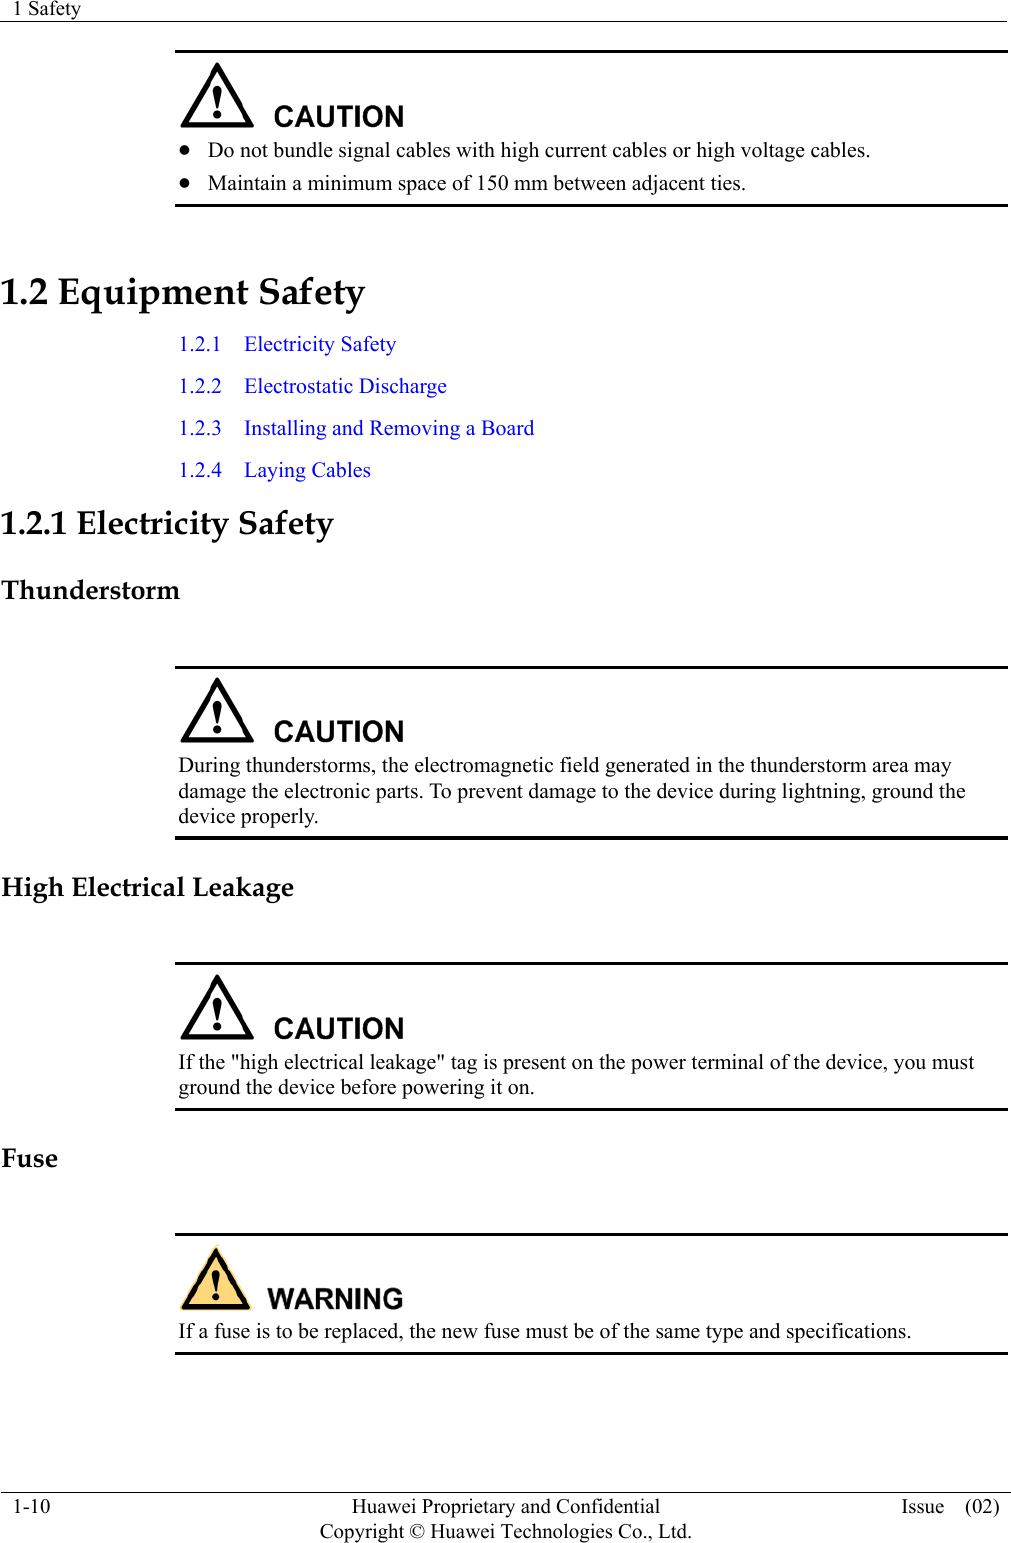 1 Safety    1-10  Huawei Proprietary and Confidential         Copyright © Huawei Technologies Co., Ltd. Issue  (02)    Do not bundle signal cables with high current cables or high voltage cables.  Maintain a minimum space of 150 mm between adjacent ties. 1.2 Equipment Safety 1.2.1  Electricity Safety 1.2.2  Electrostatic Discharge 1.2.3  Installing and Removing a Board 1.2.4  Laying Cables 1.2.1 Electricity Safety Thunderstorm   During thunderstorms, the electromagnetic field generated in the thunderstorm area may damage the electronic parts. To prevent damage to the device during lightning, ground the device properly. High Electrical Leakage   If the &quot;high electrical leakage&quot; tag is present on the power terminal of the device, you must ground the device before powering it on. Fuse   If a fuse is to be replaced, the new fuse must be of the same type and specifications.  